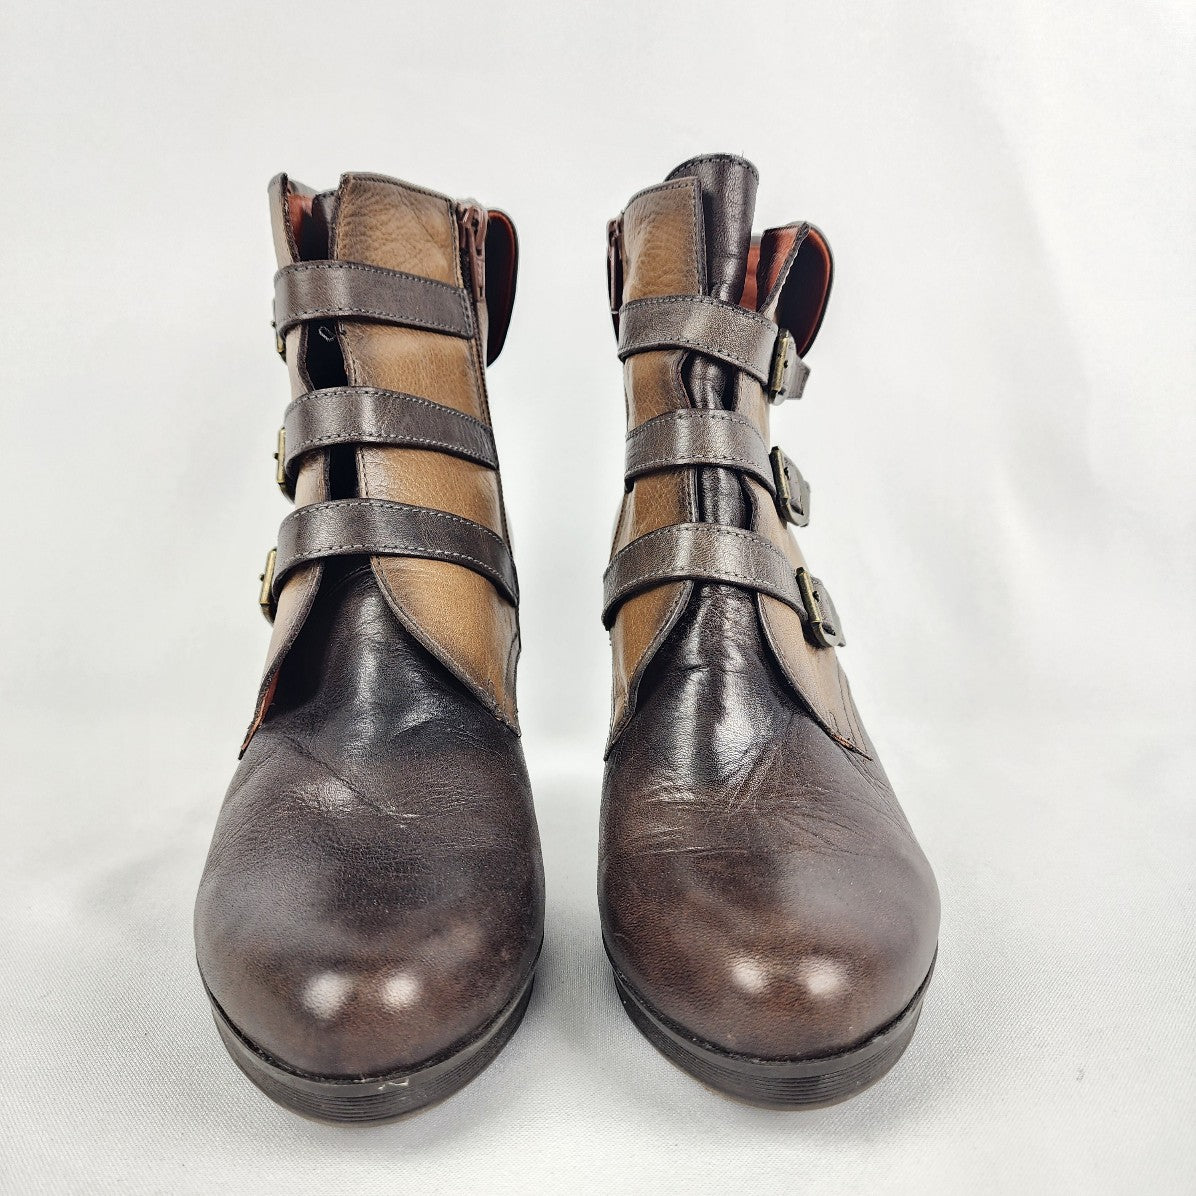 Hispanitas Two Tone Brown Strappy Leather Heeled Booties Size 8.5